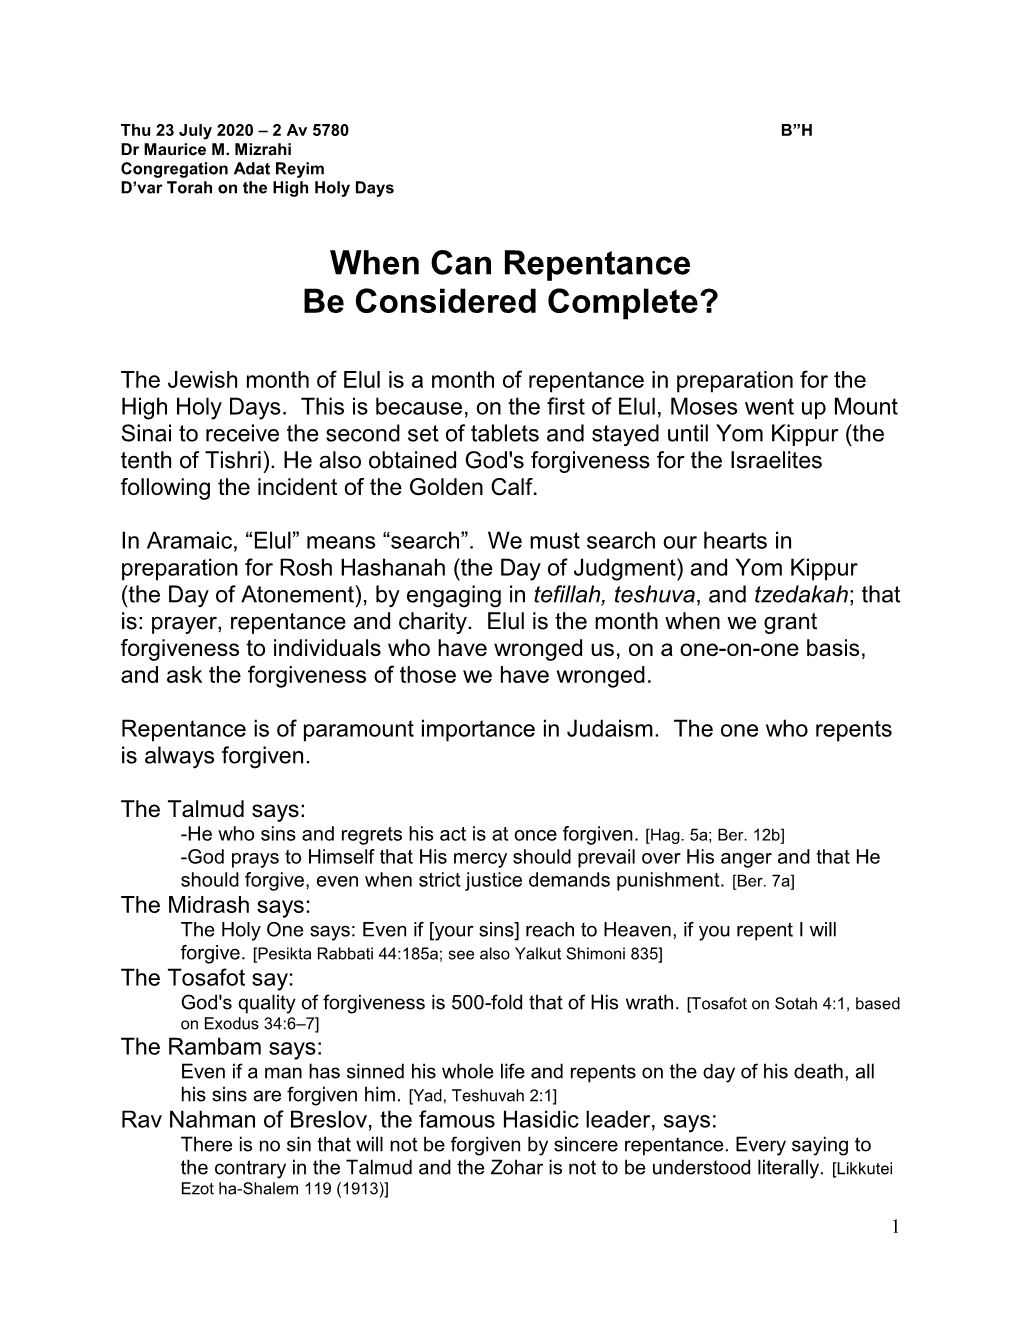 When Can Repentance Be Considered Complete? (High Holy Days)